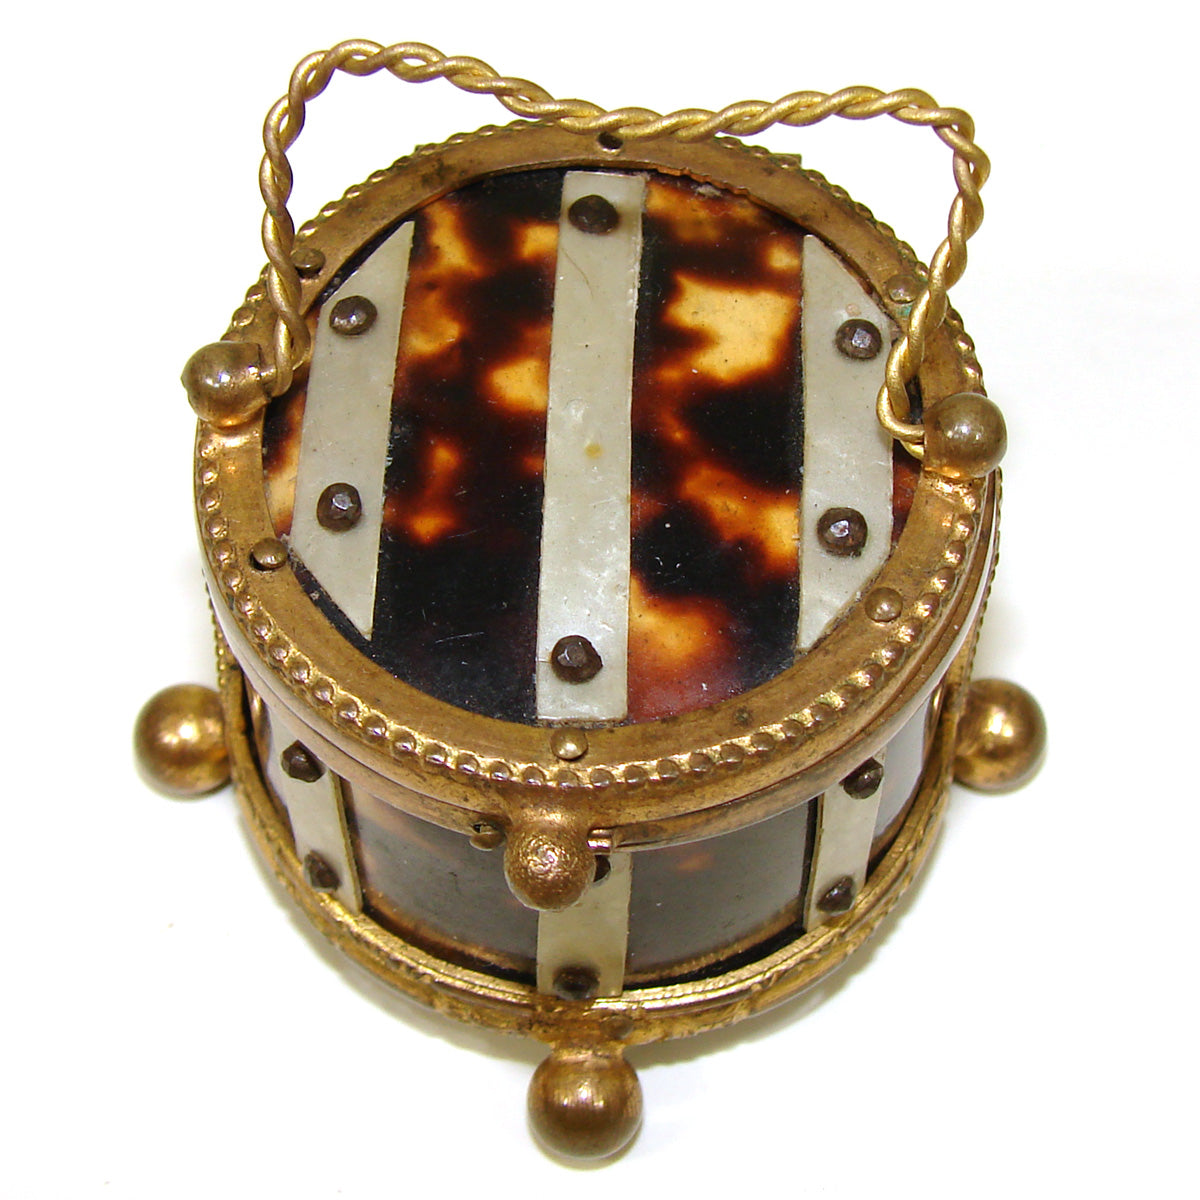 Antique French Jewelry or Ring, Trinket Box, Tortoise Shell & Mother of Pearl, Ormolu Frame